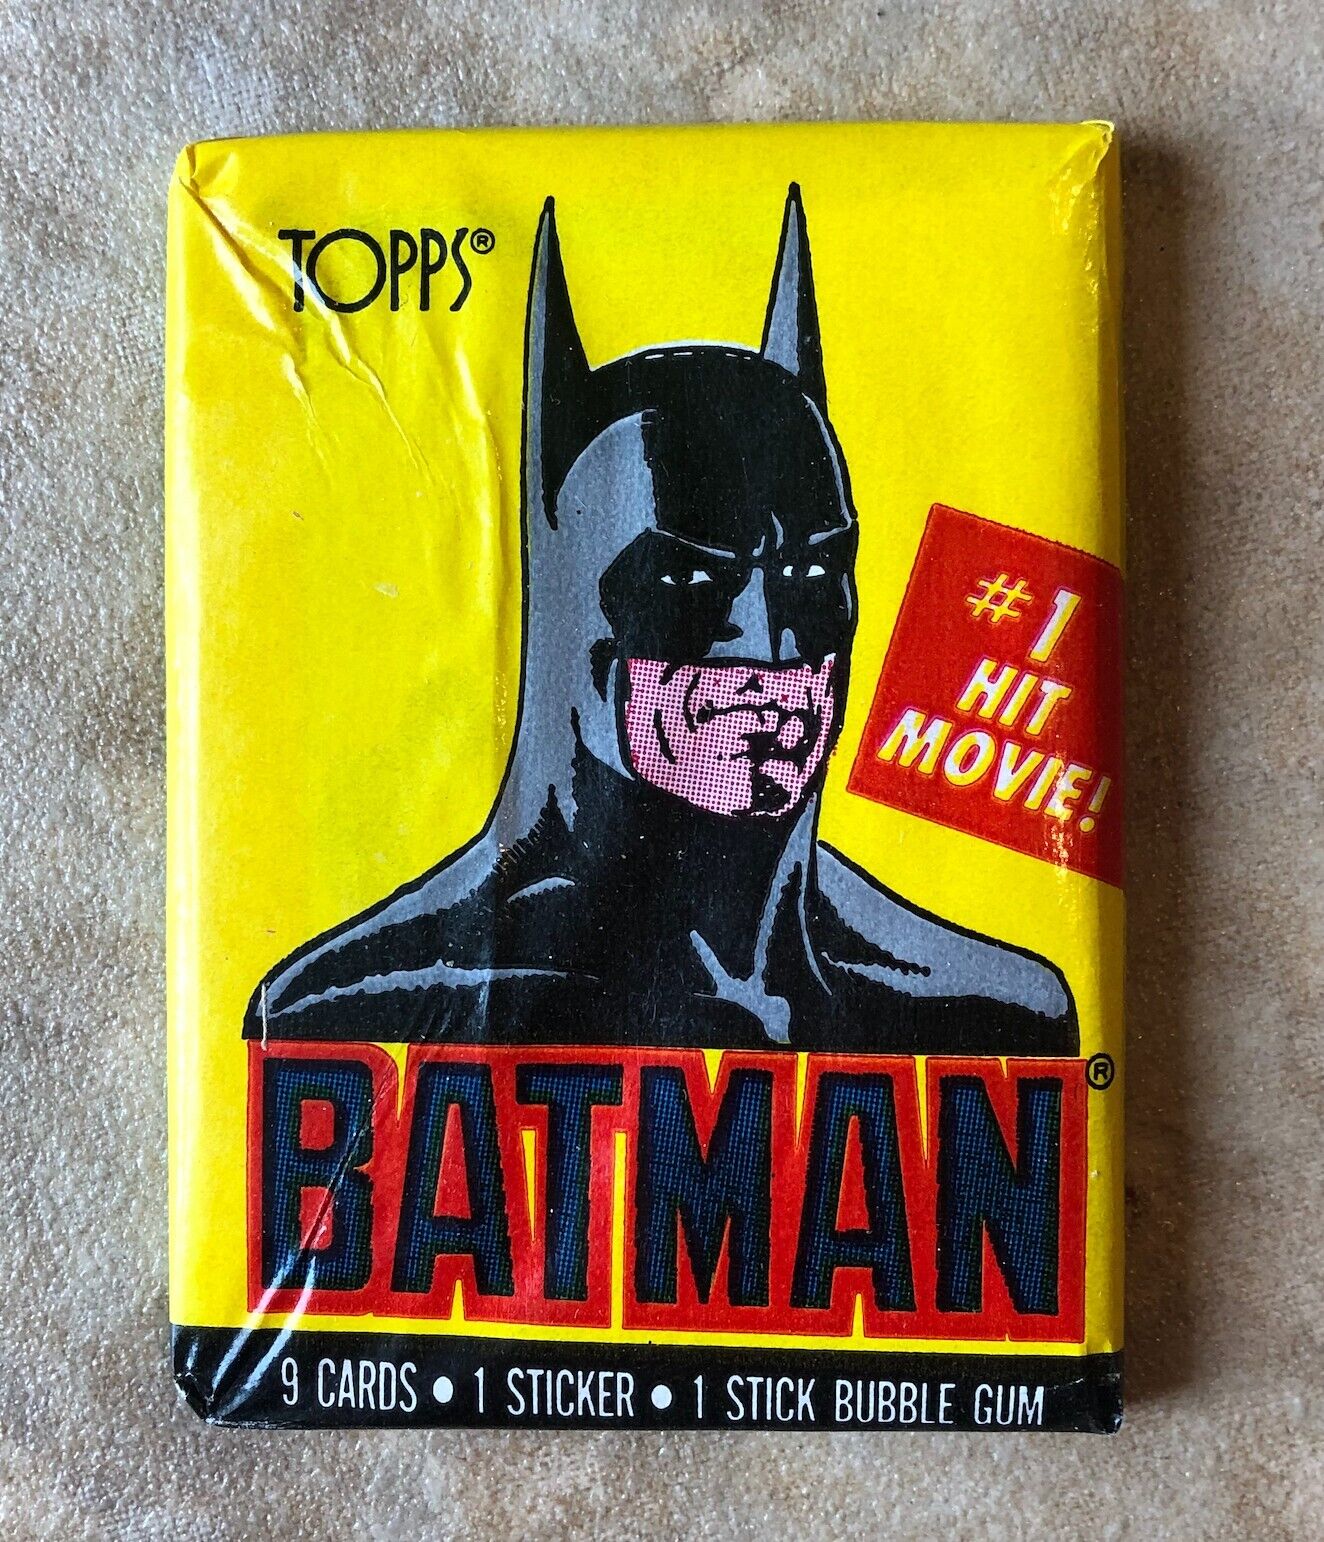 1 Pack of Batman vintage trading cards 1989 Topps